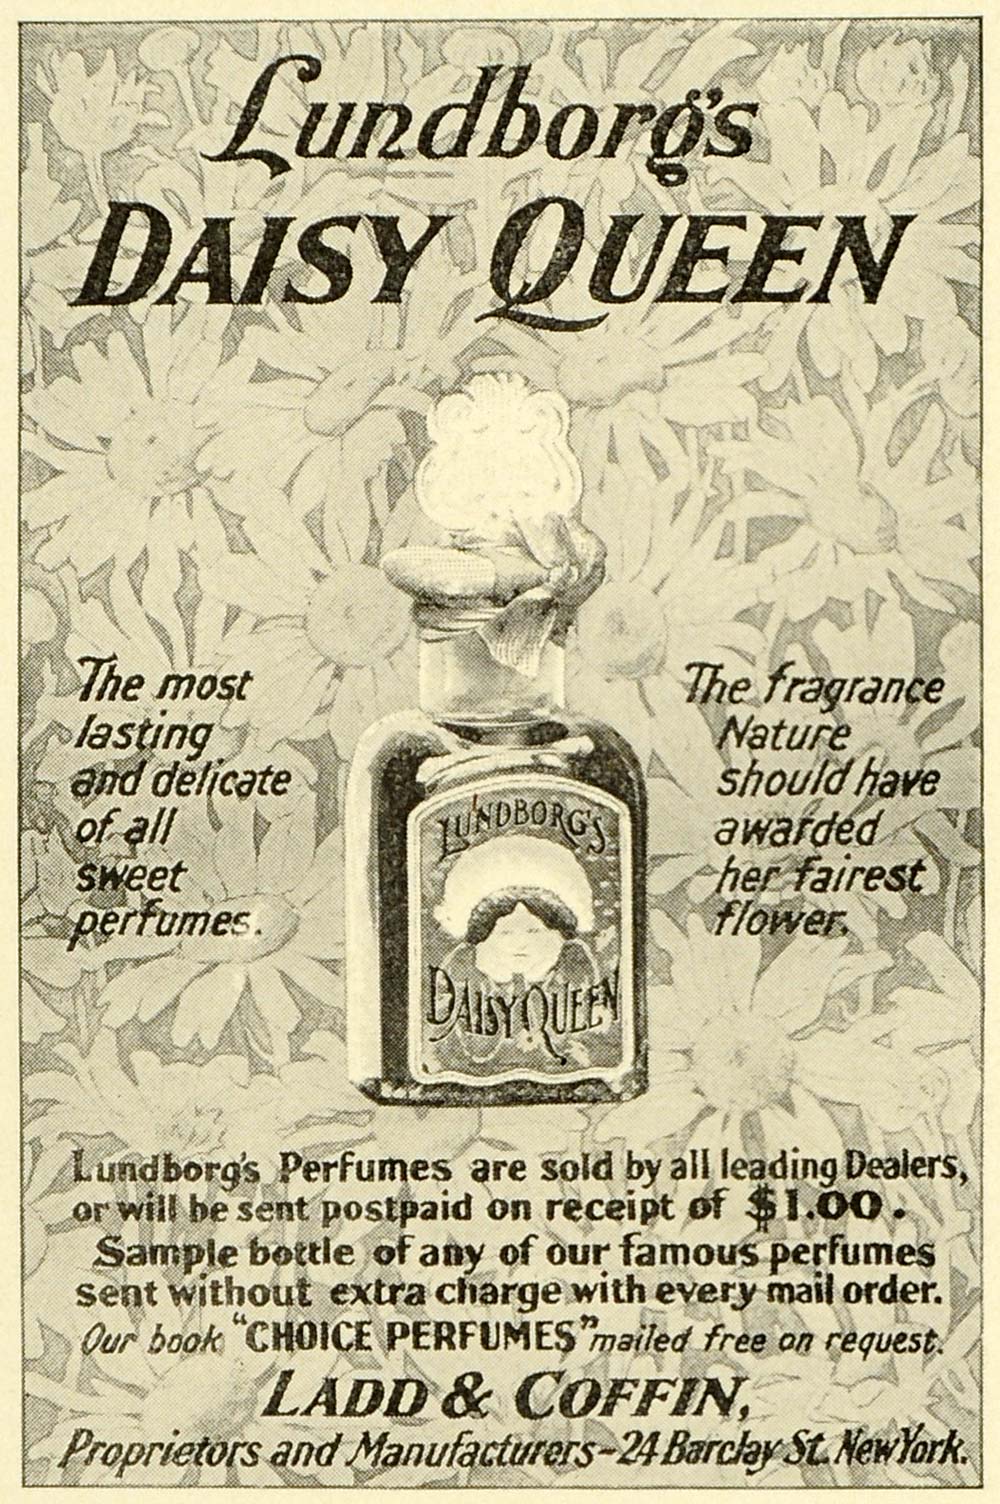 1899 Ad Lundborg Daisy Queen Perfume Bottle Price Fragrance Ladd Coffin New LHJ6